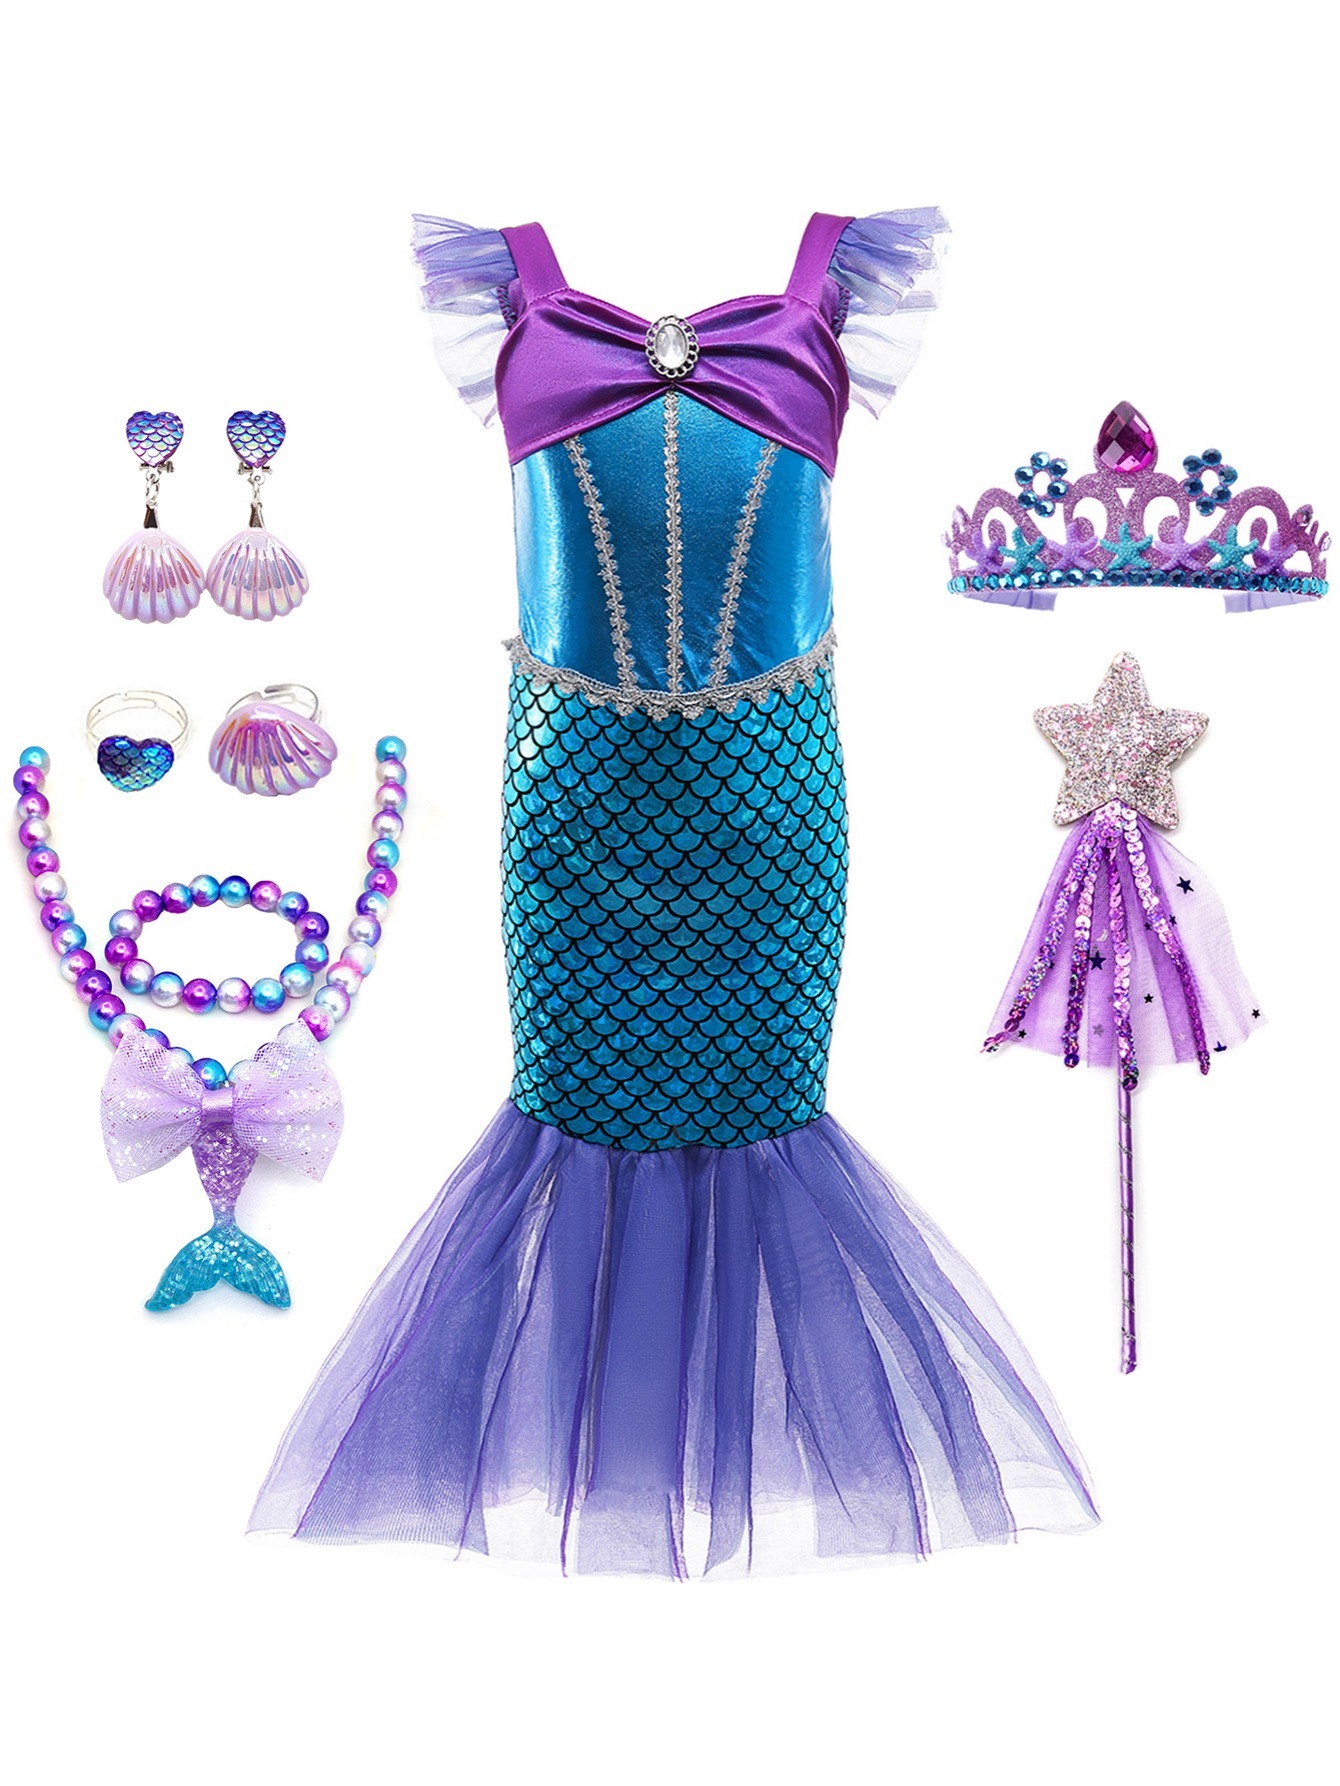 Little Mermaid Princess Dress Costume Girls Birthday Outfit Party Dress